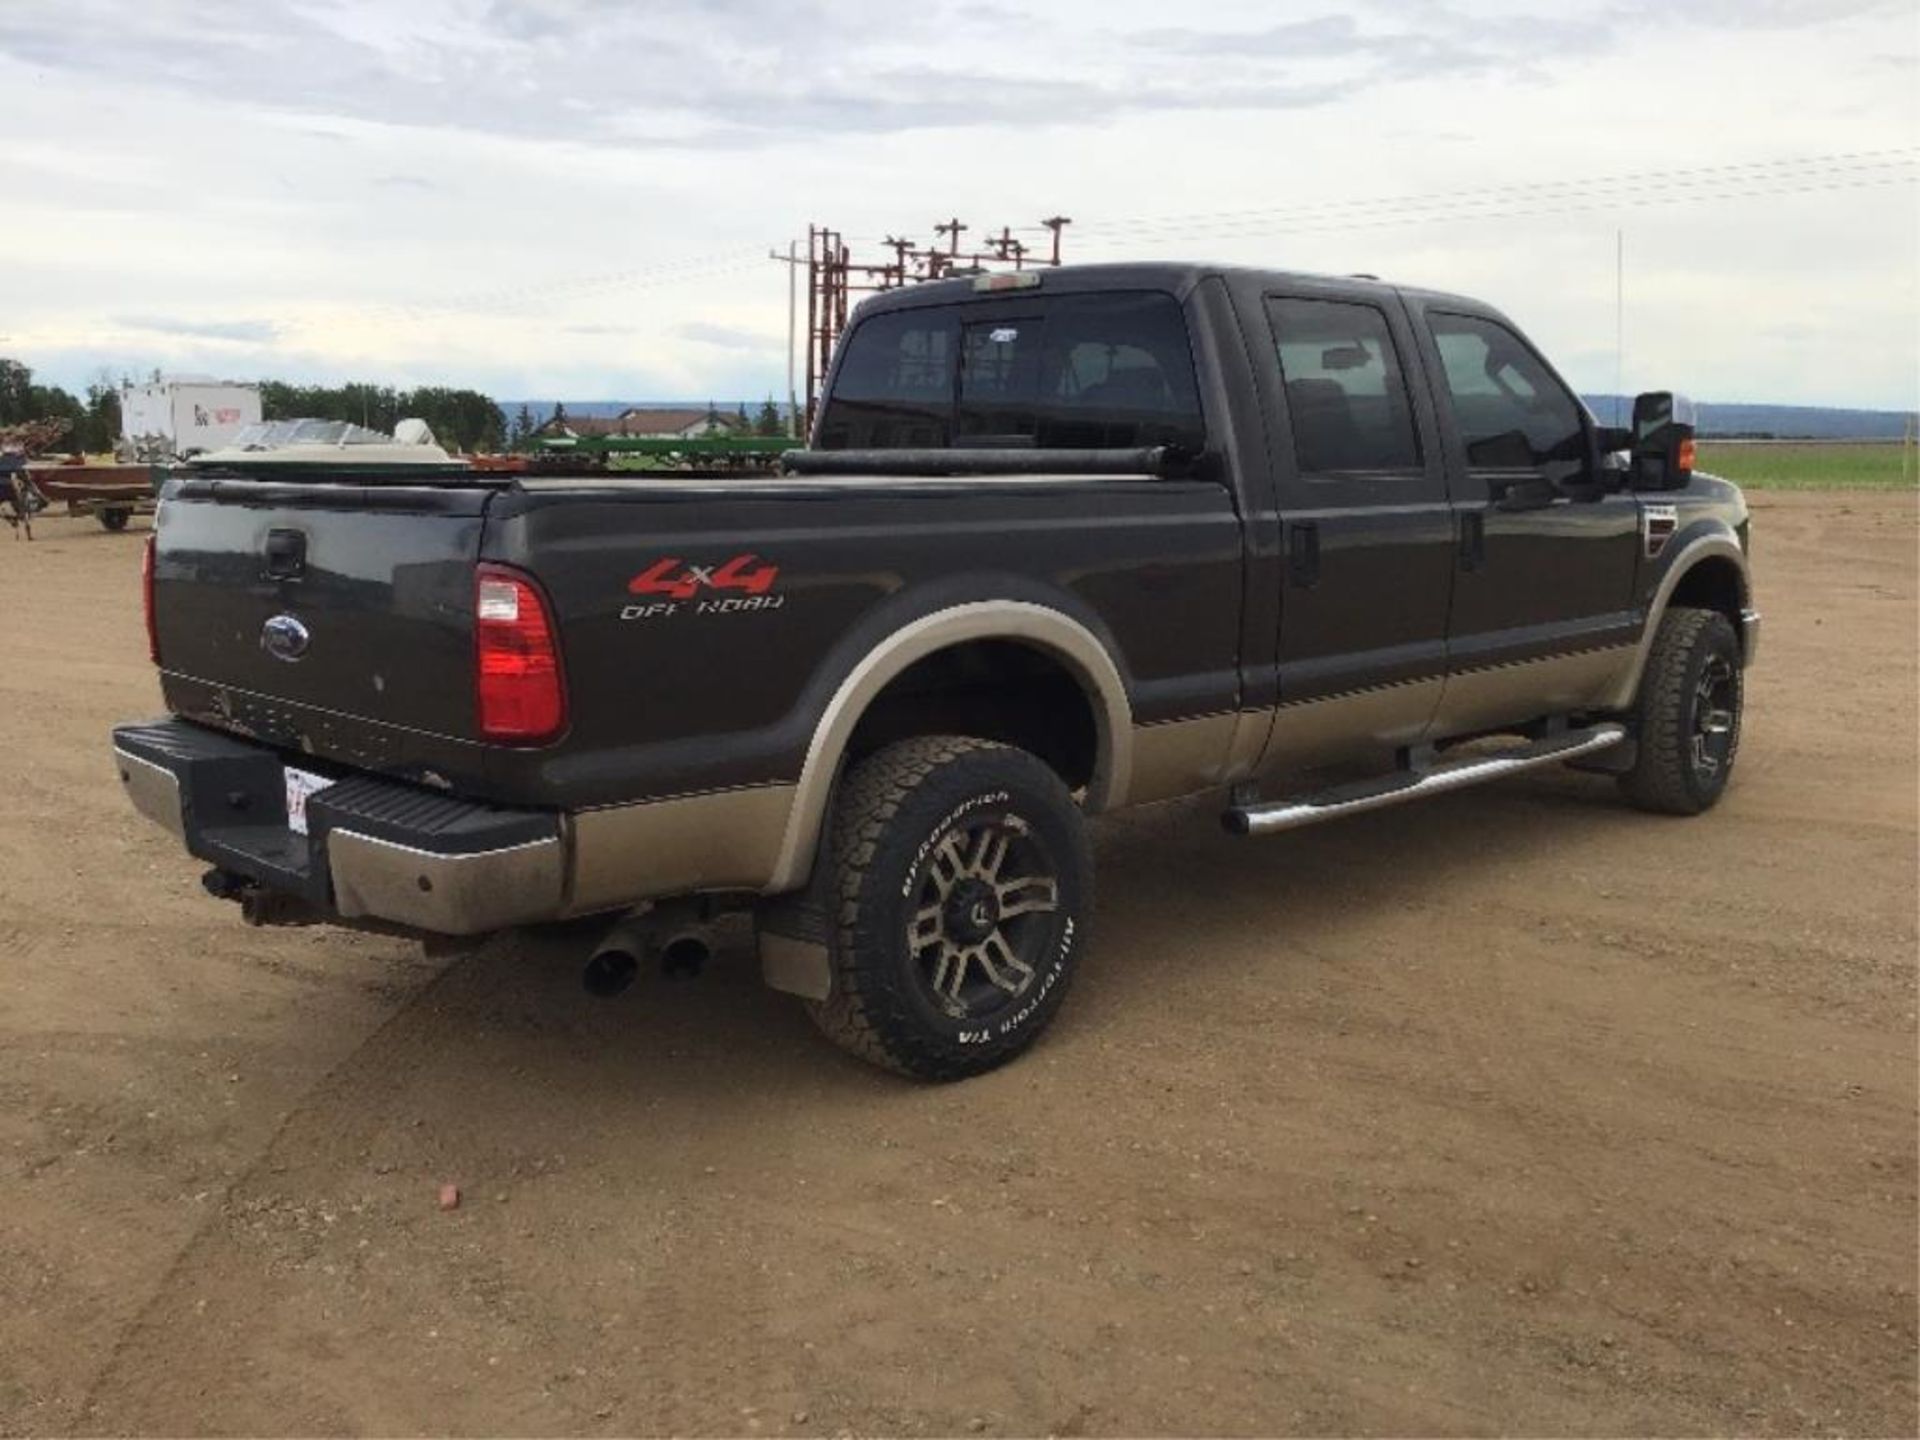 2008 Ford F350 Superduty Crew Cab Lariat 4x4 Truck VIN 1FTWW31R18EA06847 6.4L Turbo Diesel Eng, A/T, - Image 4 of 22